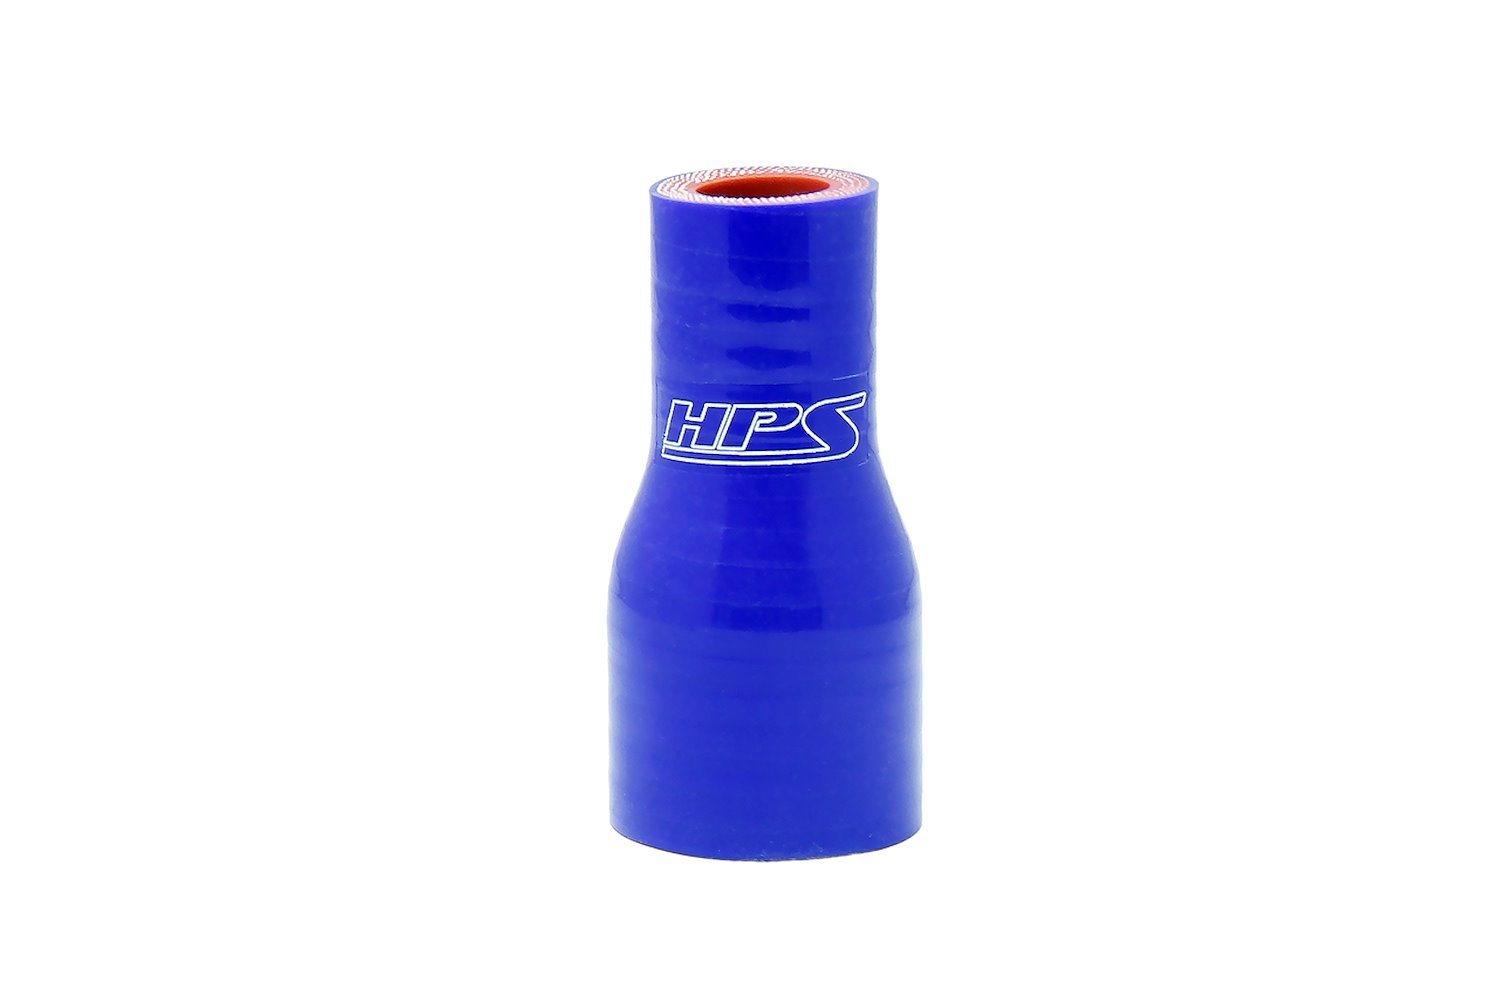 HTSR-138-162-BLUE Silicone Reducer Hose, High-Temp 4-Ply Reinforced, 1-3/8 in. - 1-5/8 in. ID, 3 in. Long, Blue